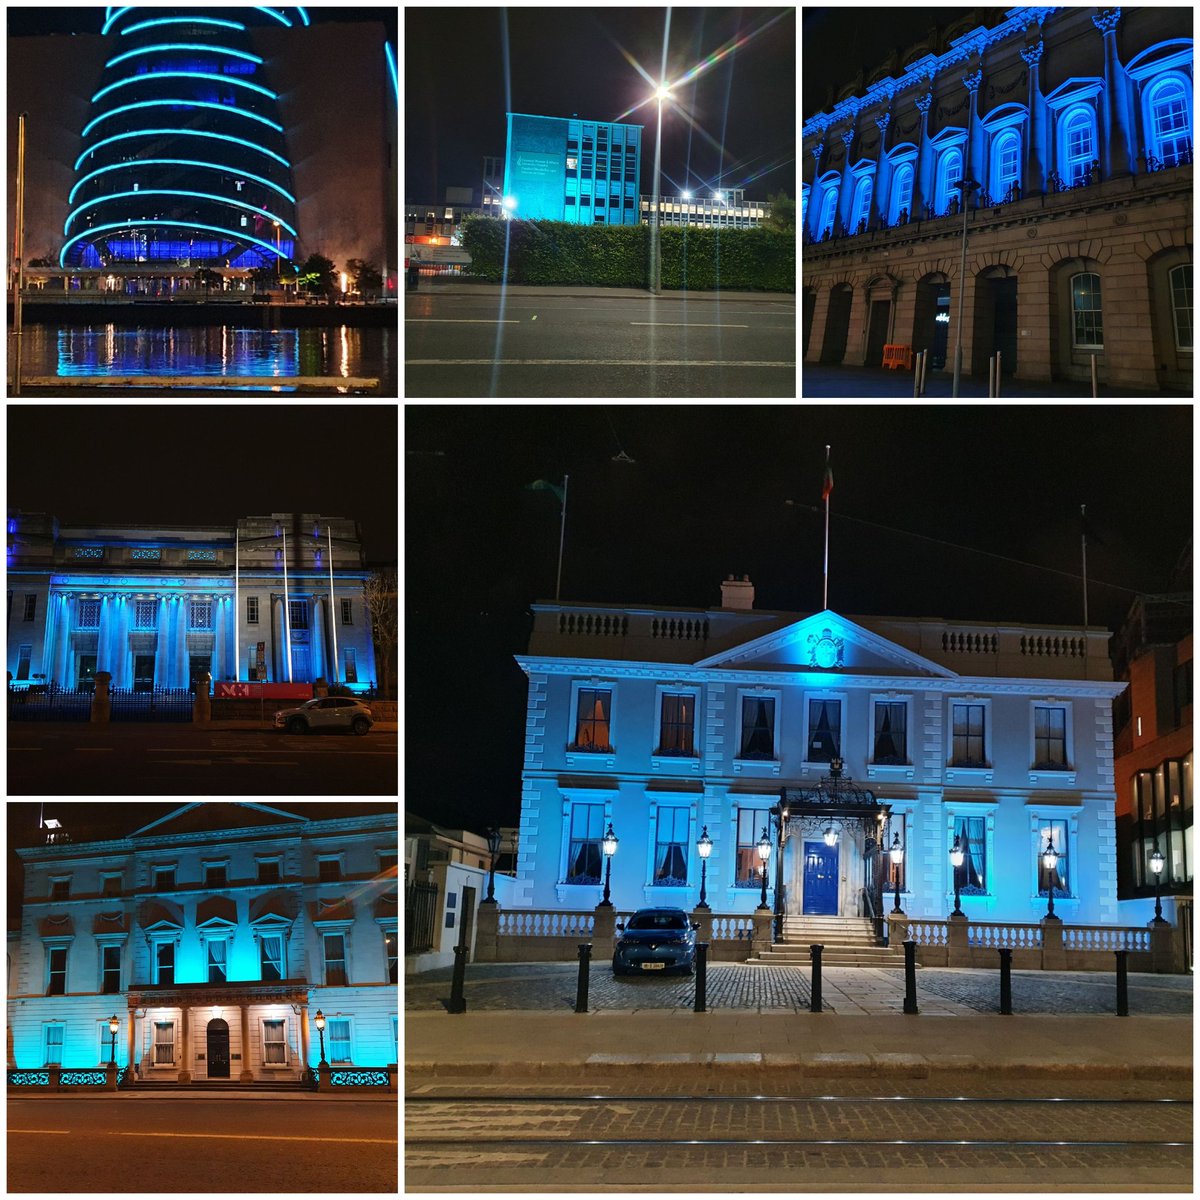 Dublin looking good in TEAlights tonight for @OvarianCancerDY Thank you for supporting @TheCCD @CoombeHospital @IrishRail @NCH_Music @MansionHouseDub #iveaghhouse @dfatirl #TEALights #WOCD2021